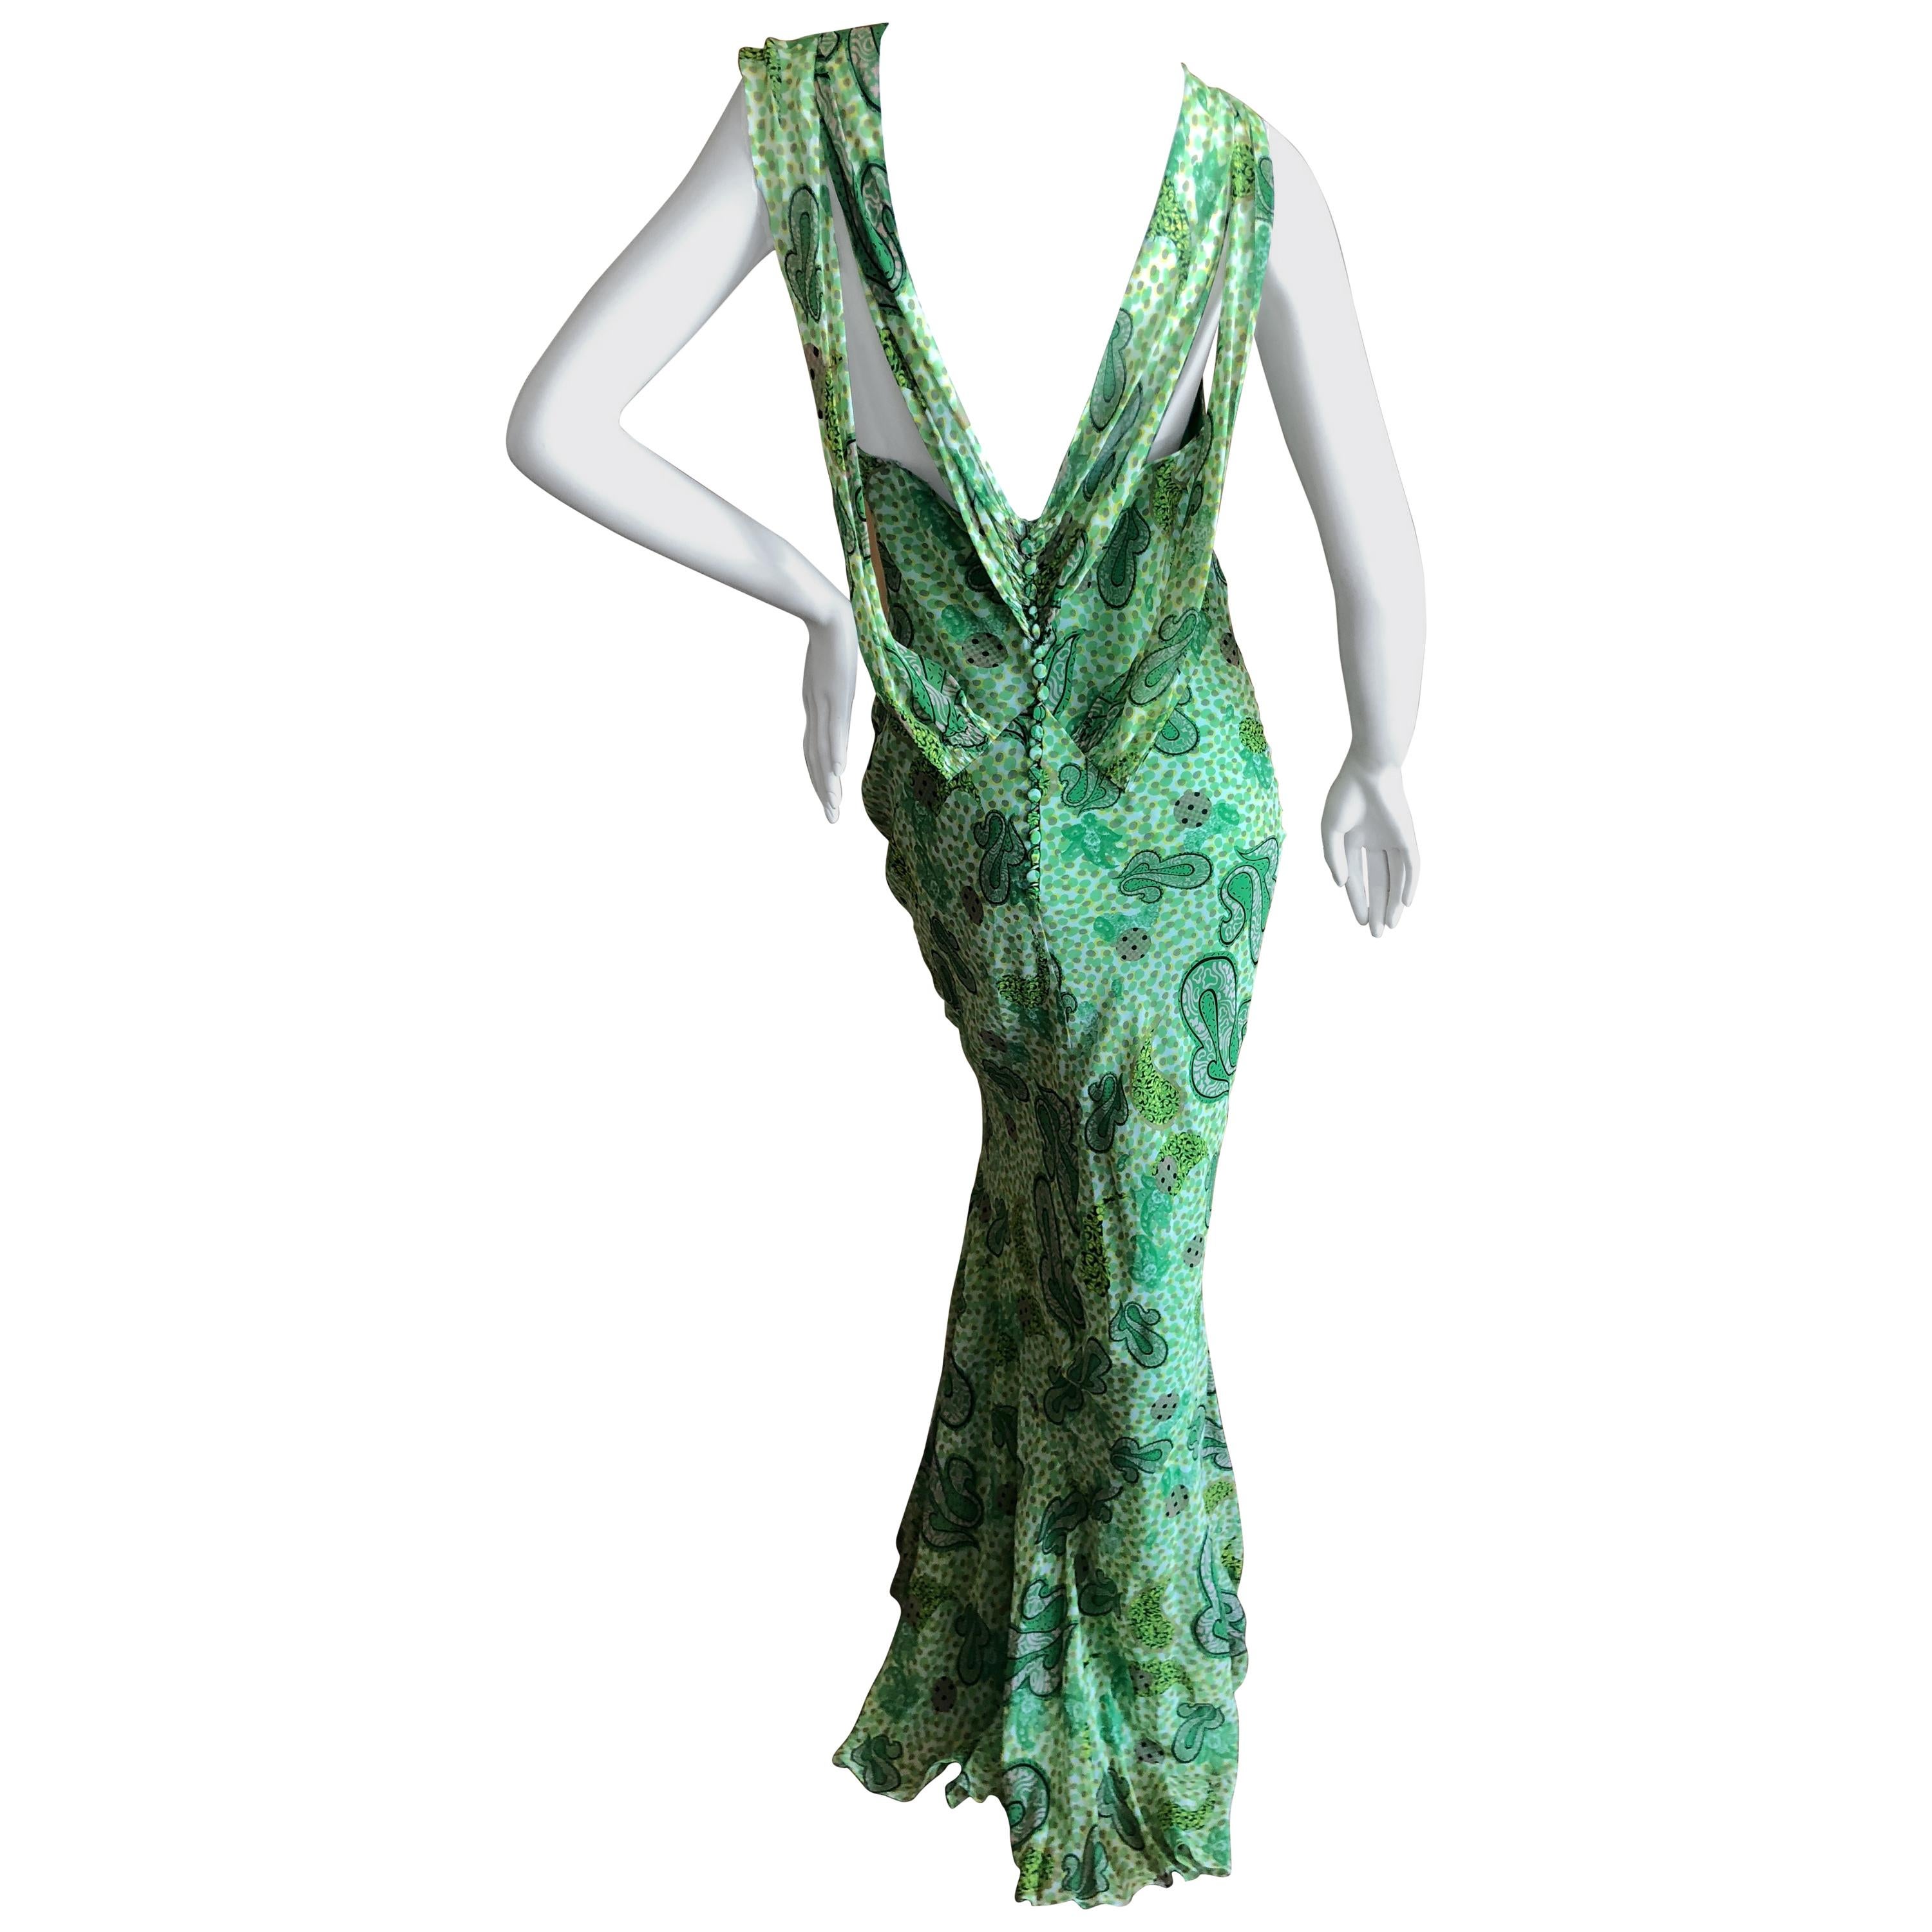  John Galliano 2002 Green Silk Paisley Ruffled Evening Dress with Low Cowl Back For Sale